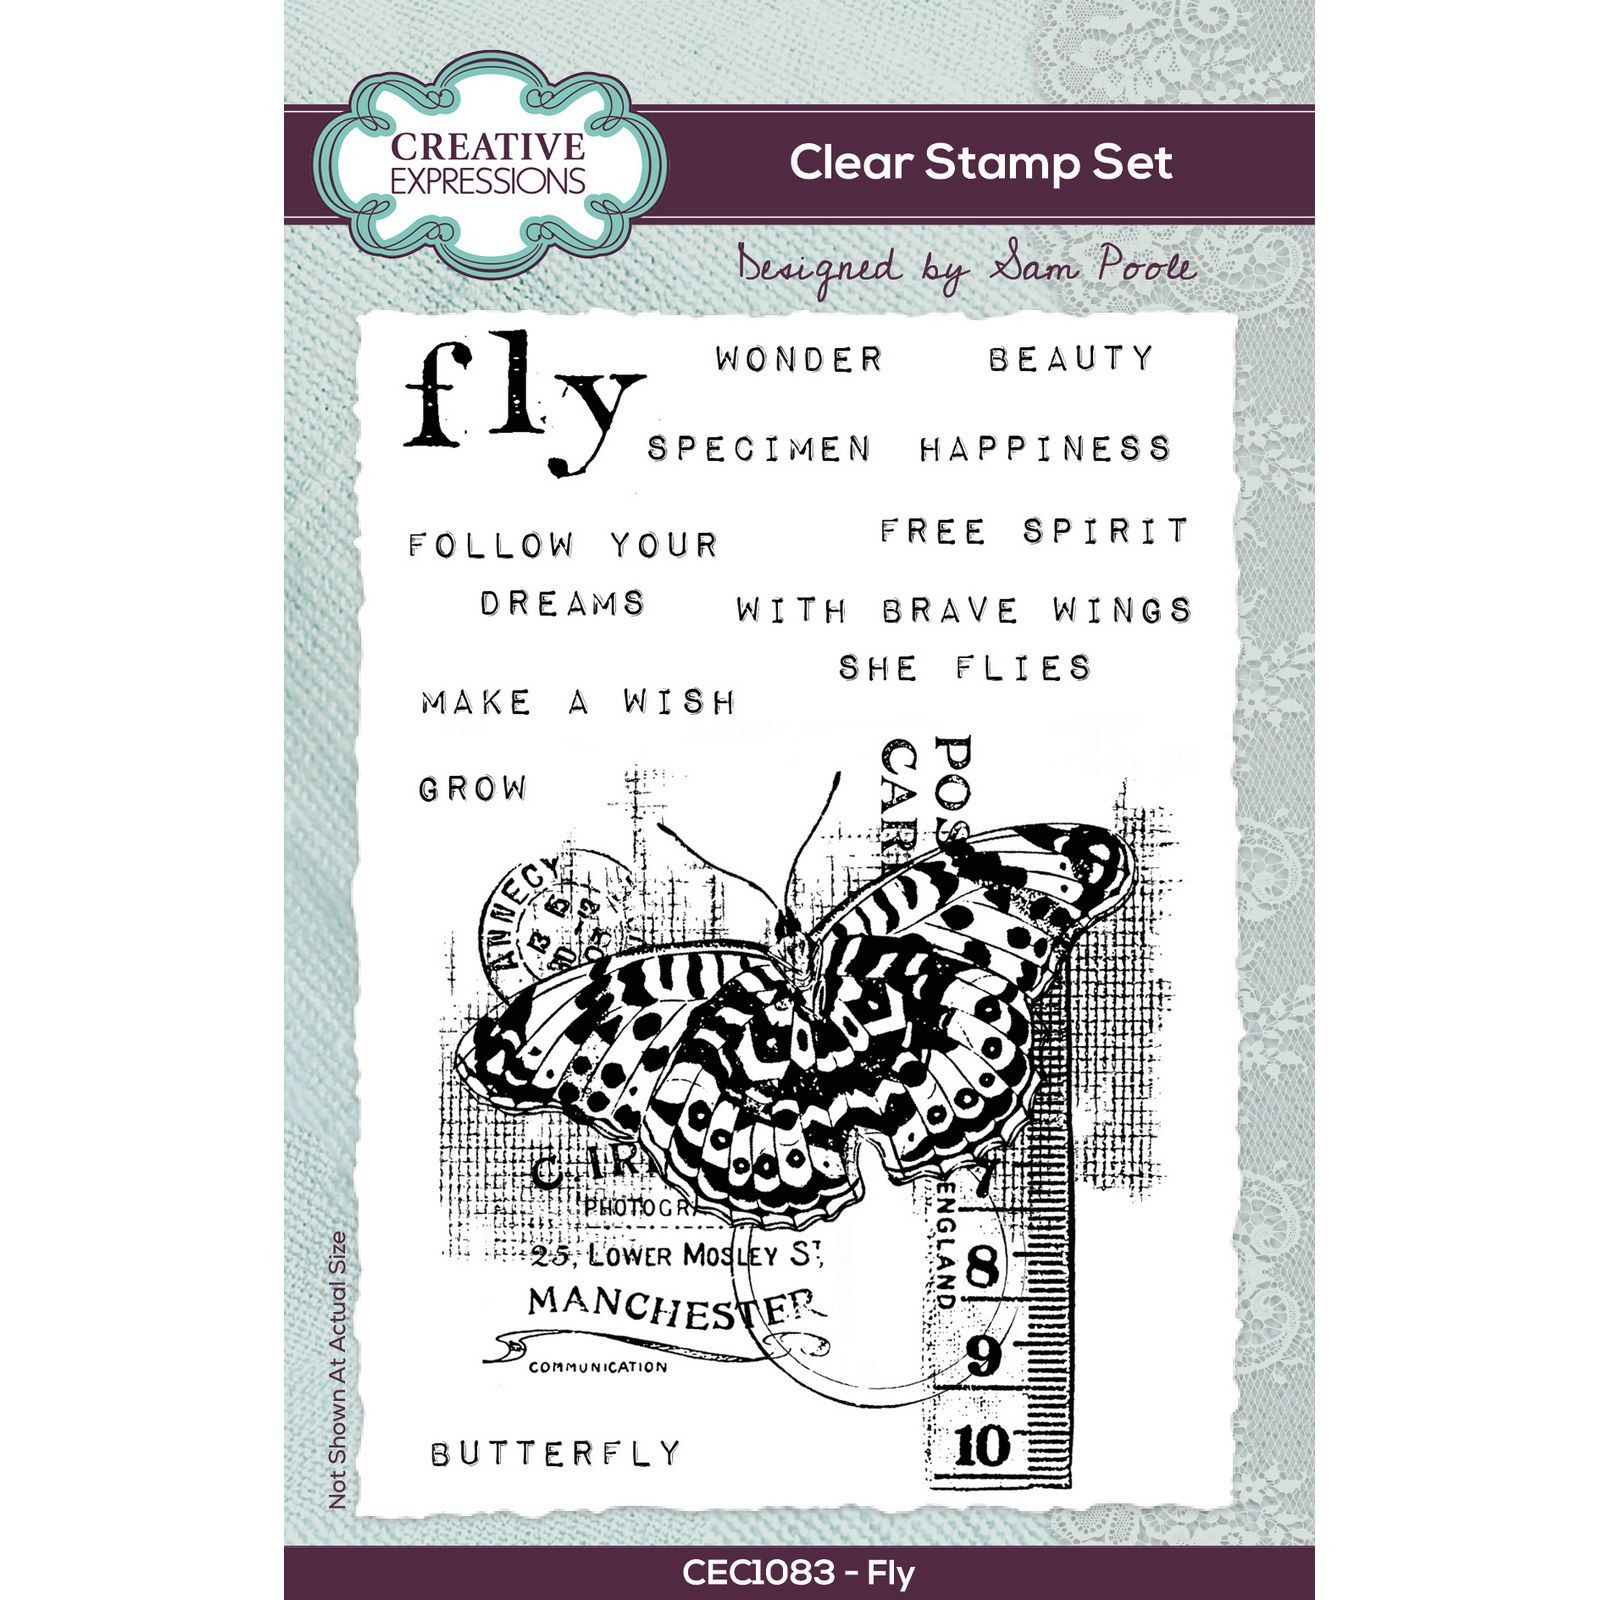 Creative Expressions • Clear Stamp Set Fly